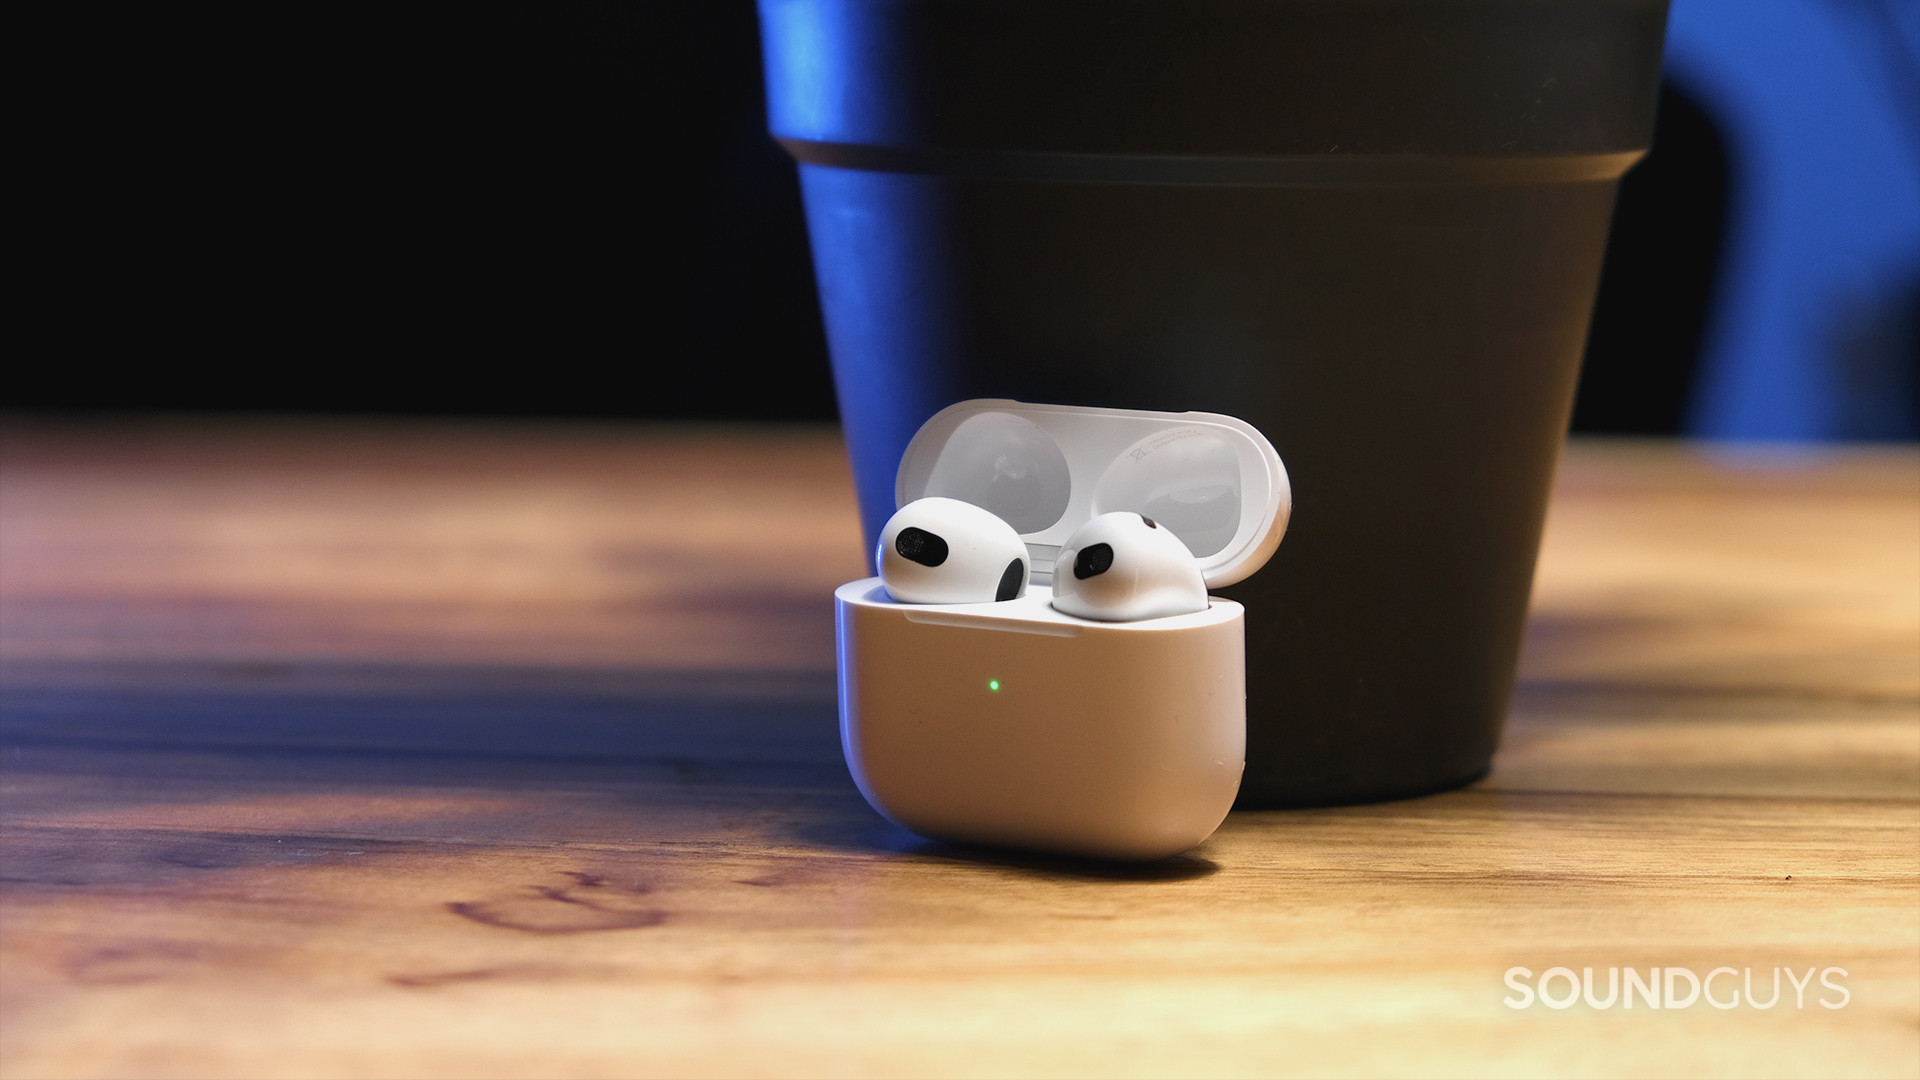 The Apple AirPods (3rd generation) open case holds the earbuds and sits on a wood surface.